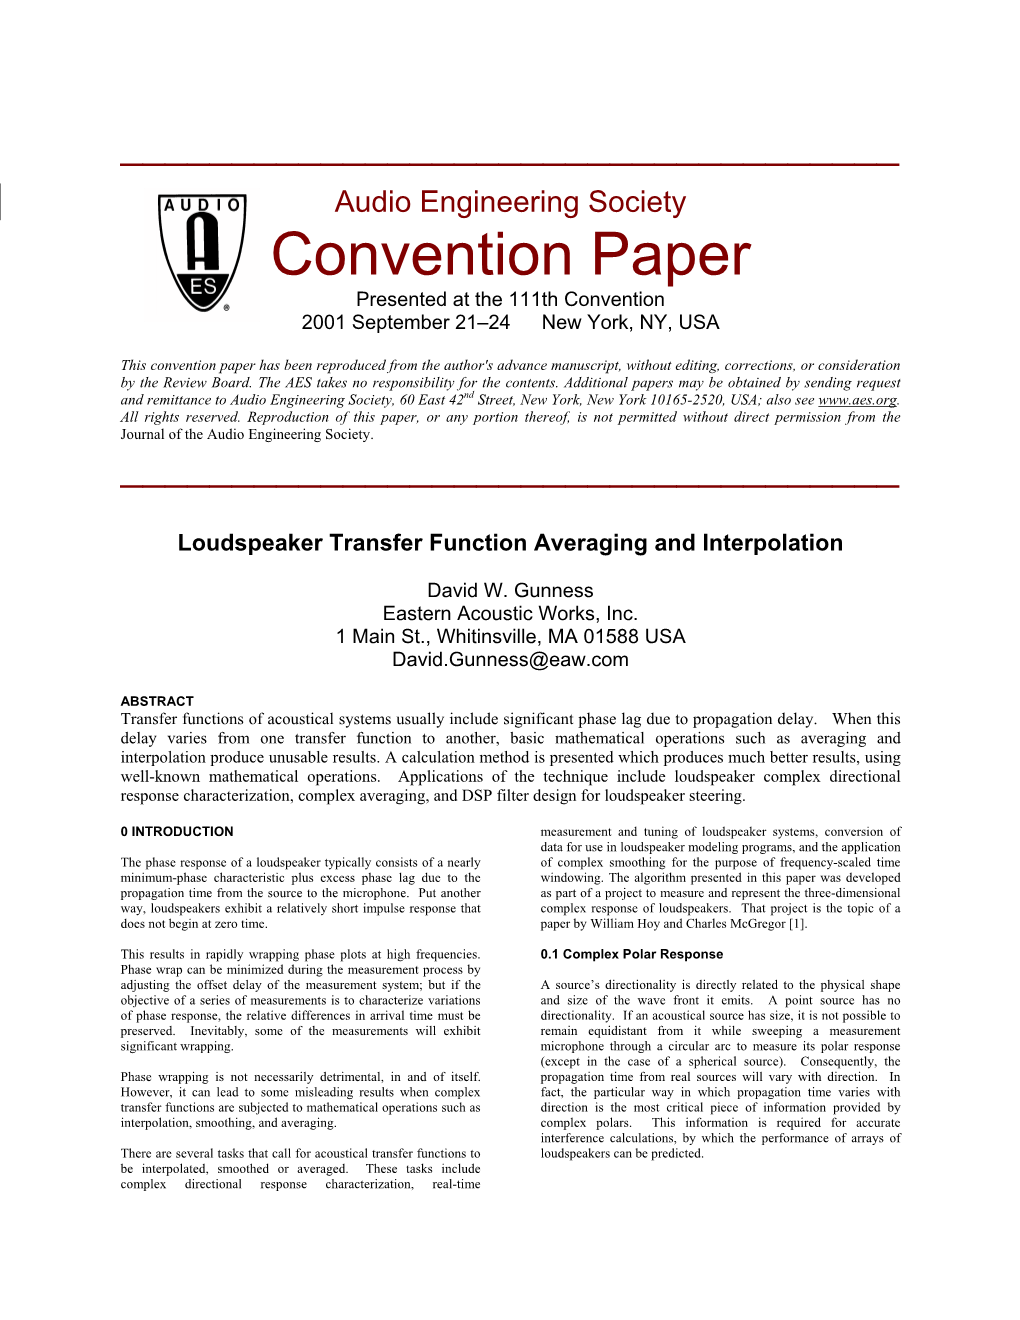 Convention Paper Presented at the 111Th Convention 2001 September 21–24 New York, NY, USA